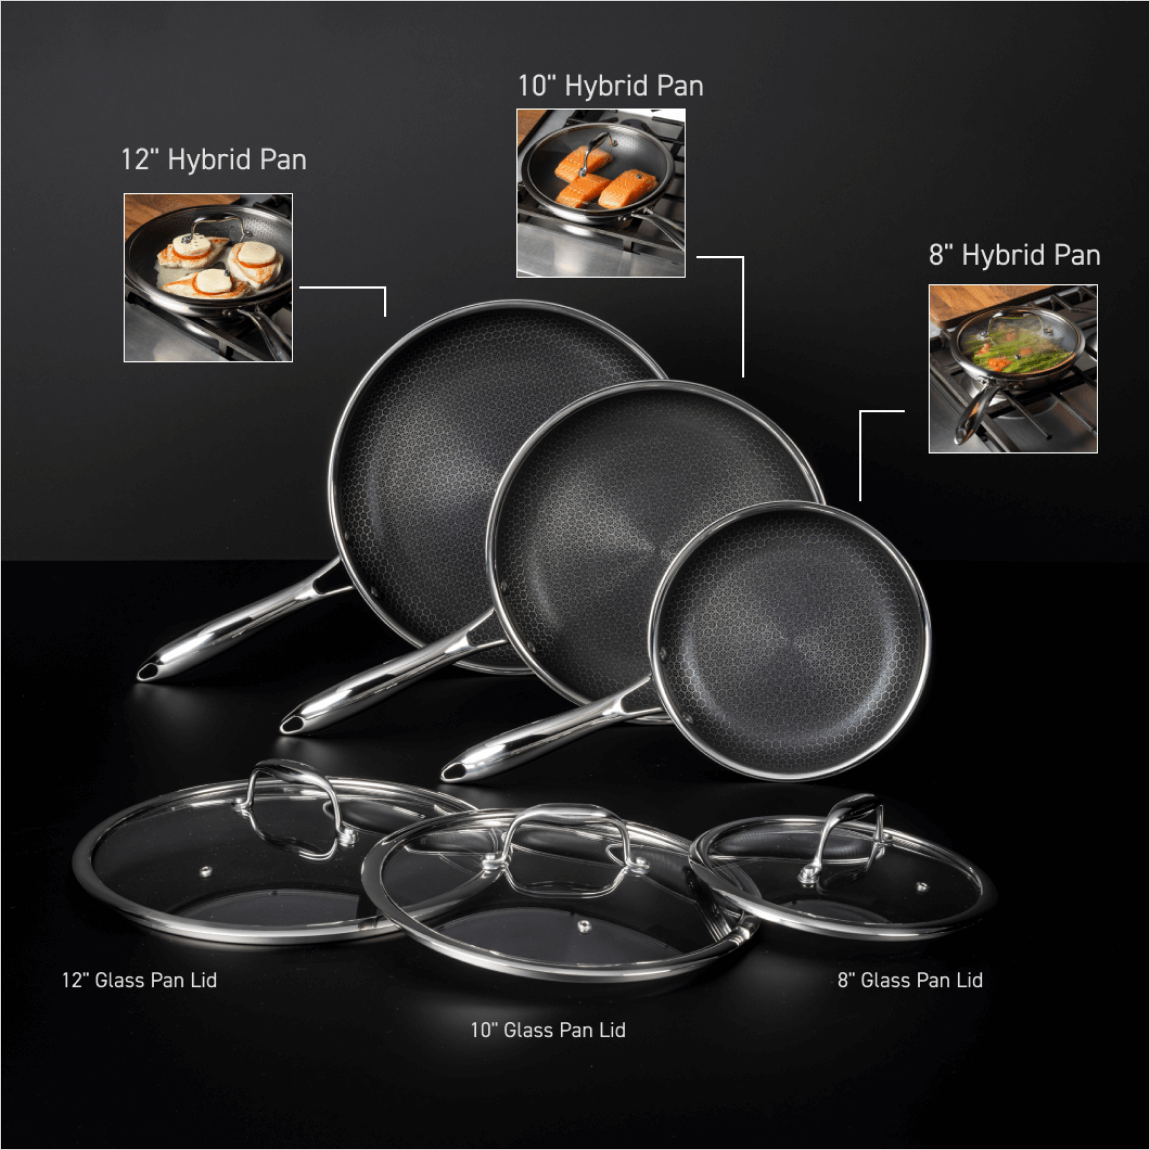 Don't Miss Hailey Bieber-Approved HexClad Cookware Deals on Prime Day